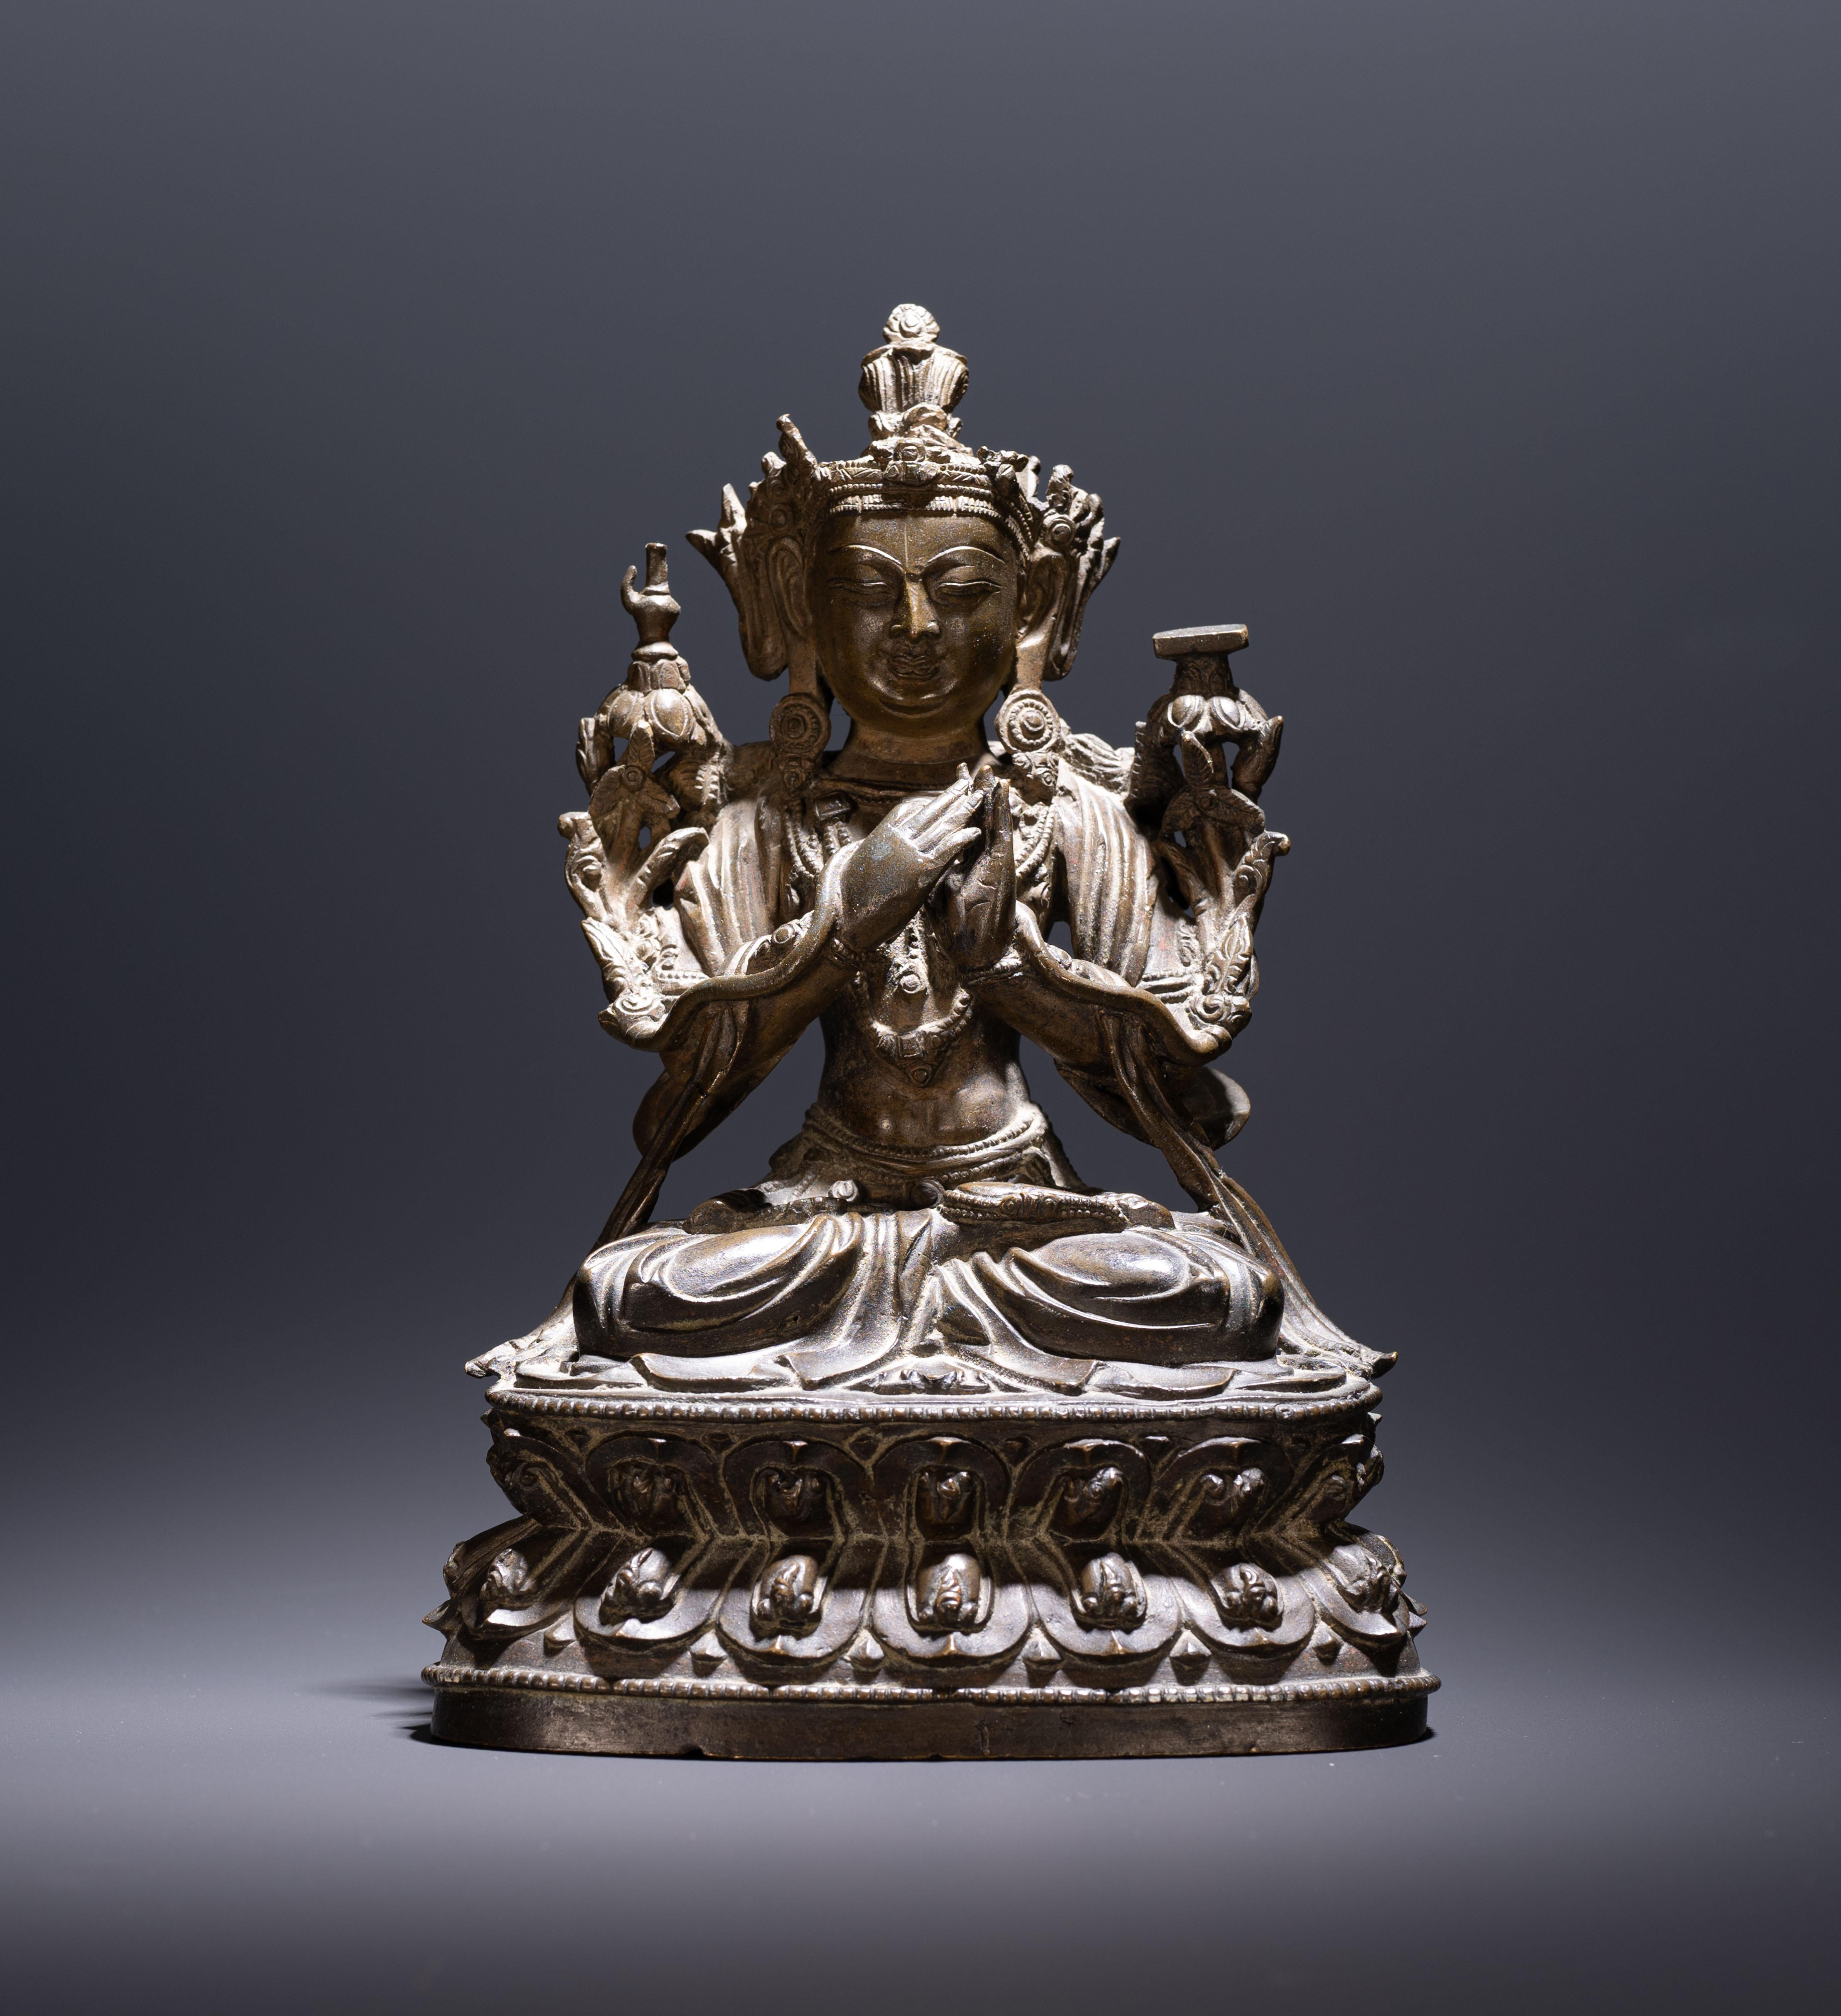 Chinese Ming Dynasty period bronze figure of Bodhisattva of the future - Maitreya.
It is beautifully modeled in fine details typical of high-quality casting done in the Ming dynasty (1368-1644).
The Bodhisattva is seated on a double-lotus base, legs